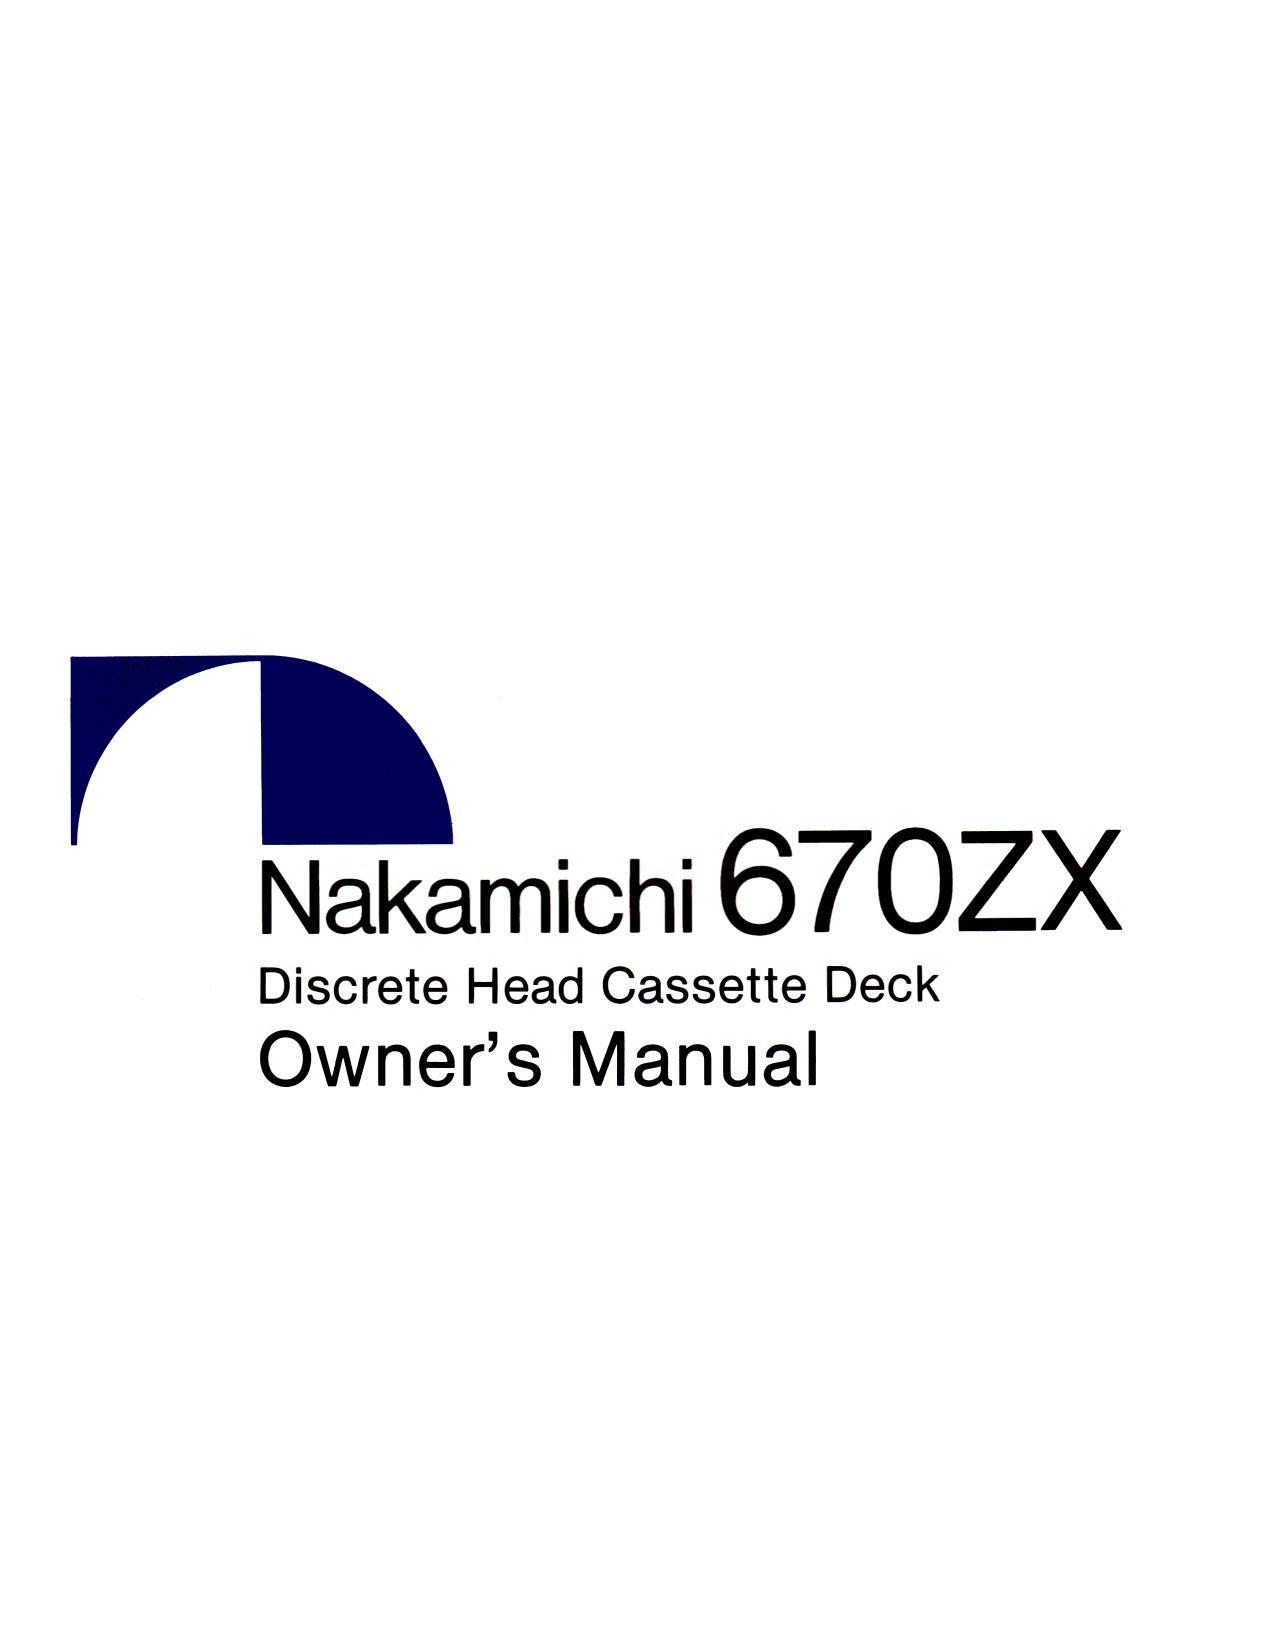 Nakamichi 670ZX Owners Manual